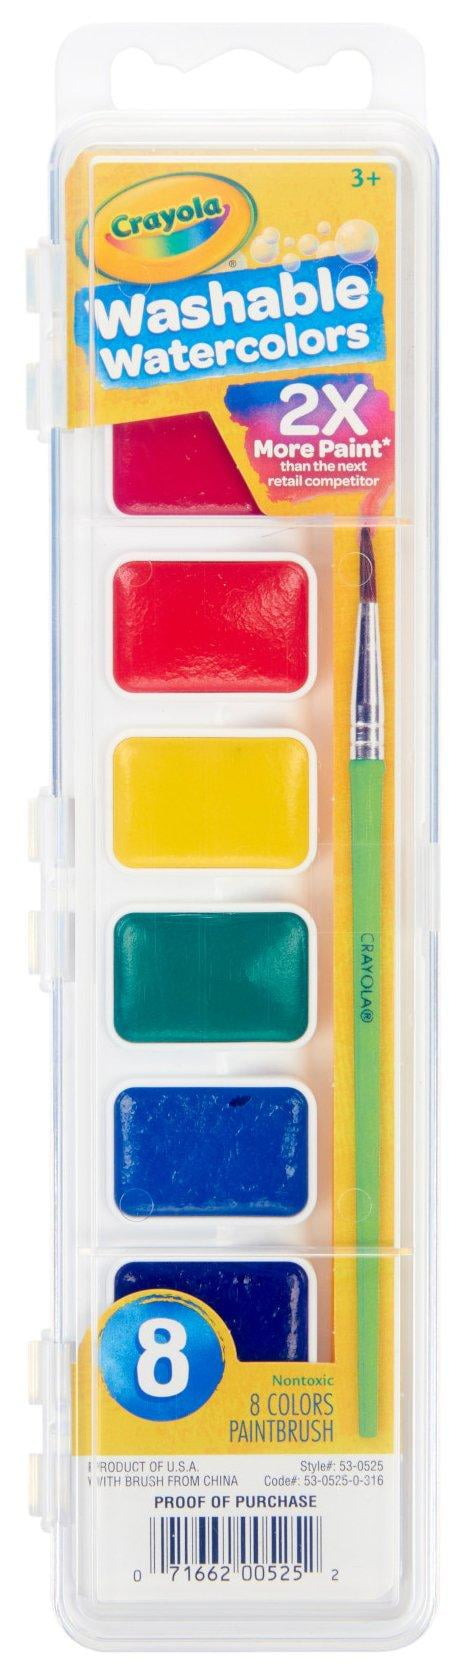 Crayola. 530525 Washable Watercolor Paint, 8 Assorted Colors 